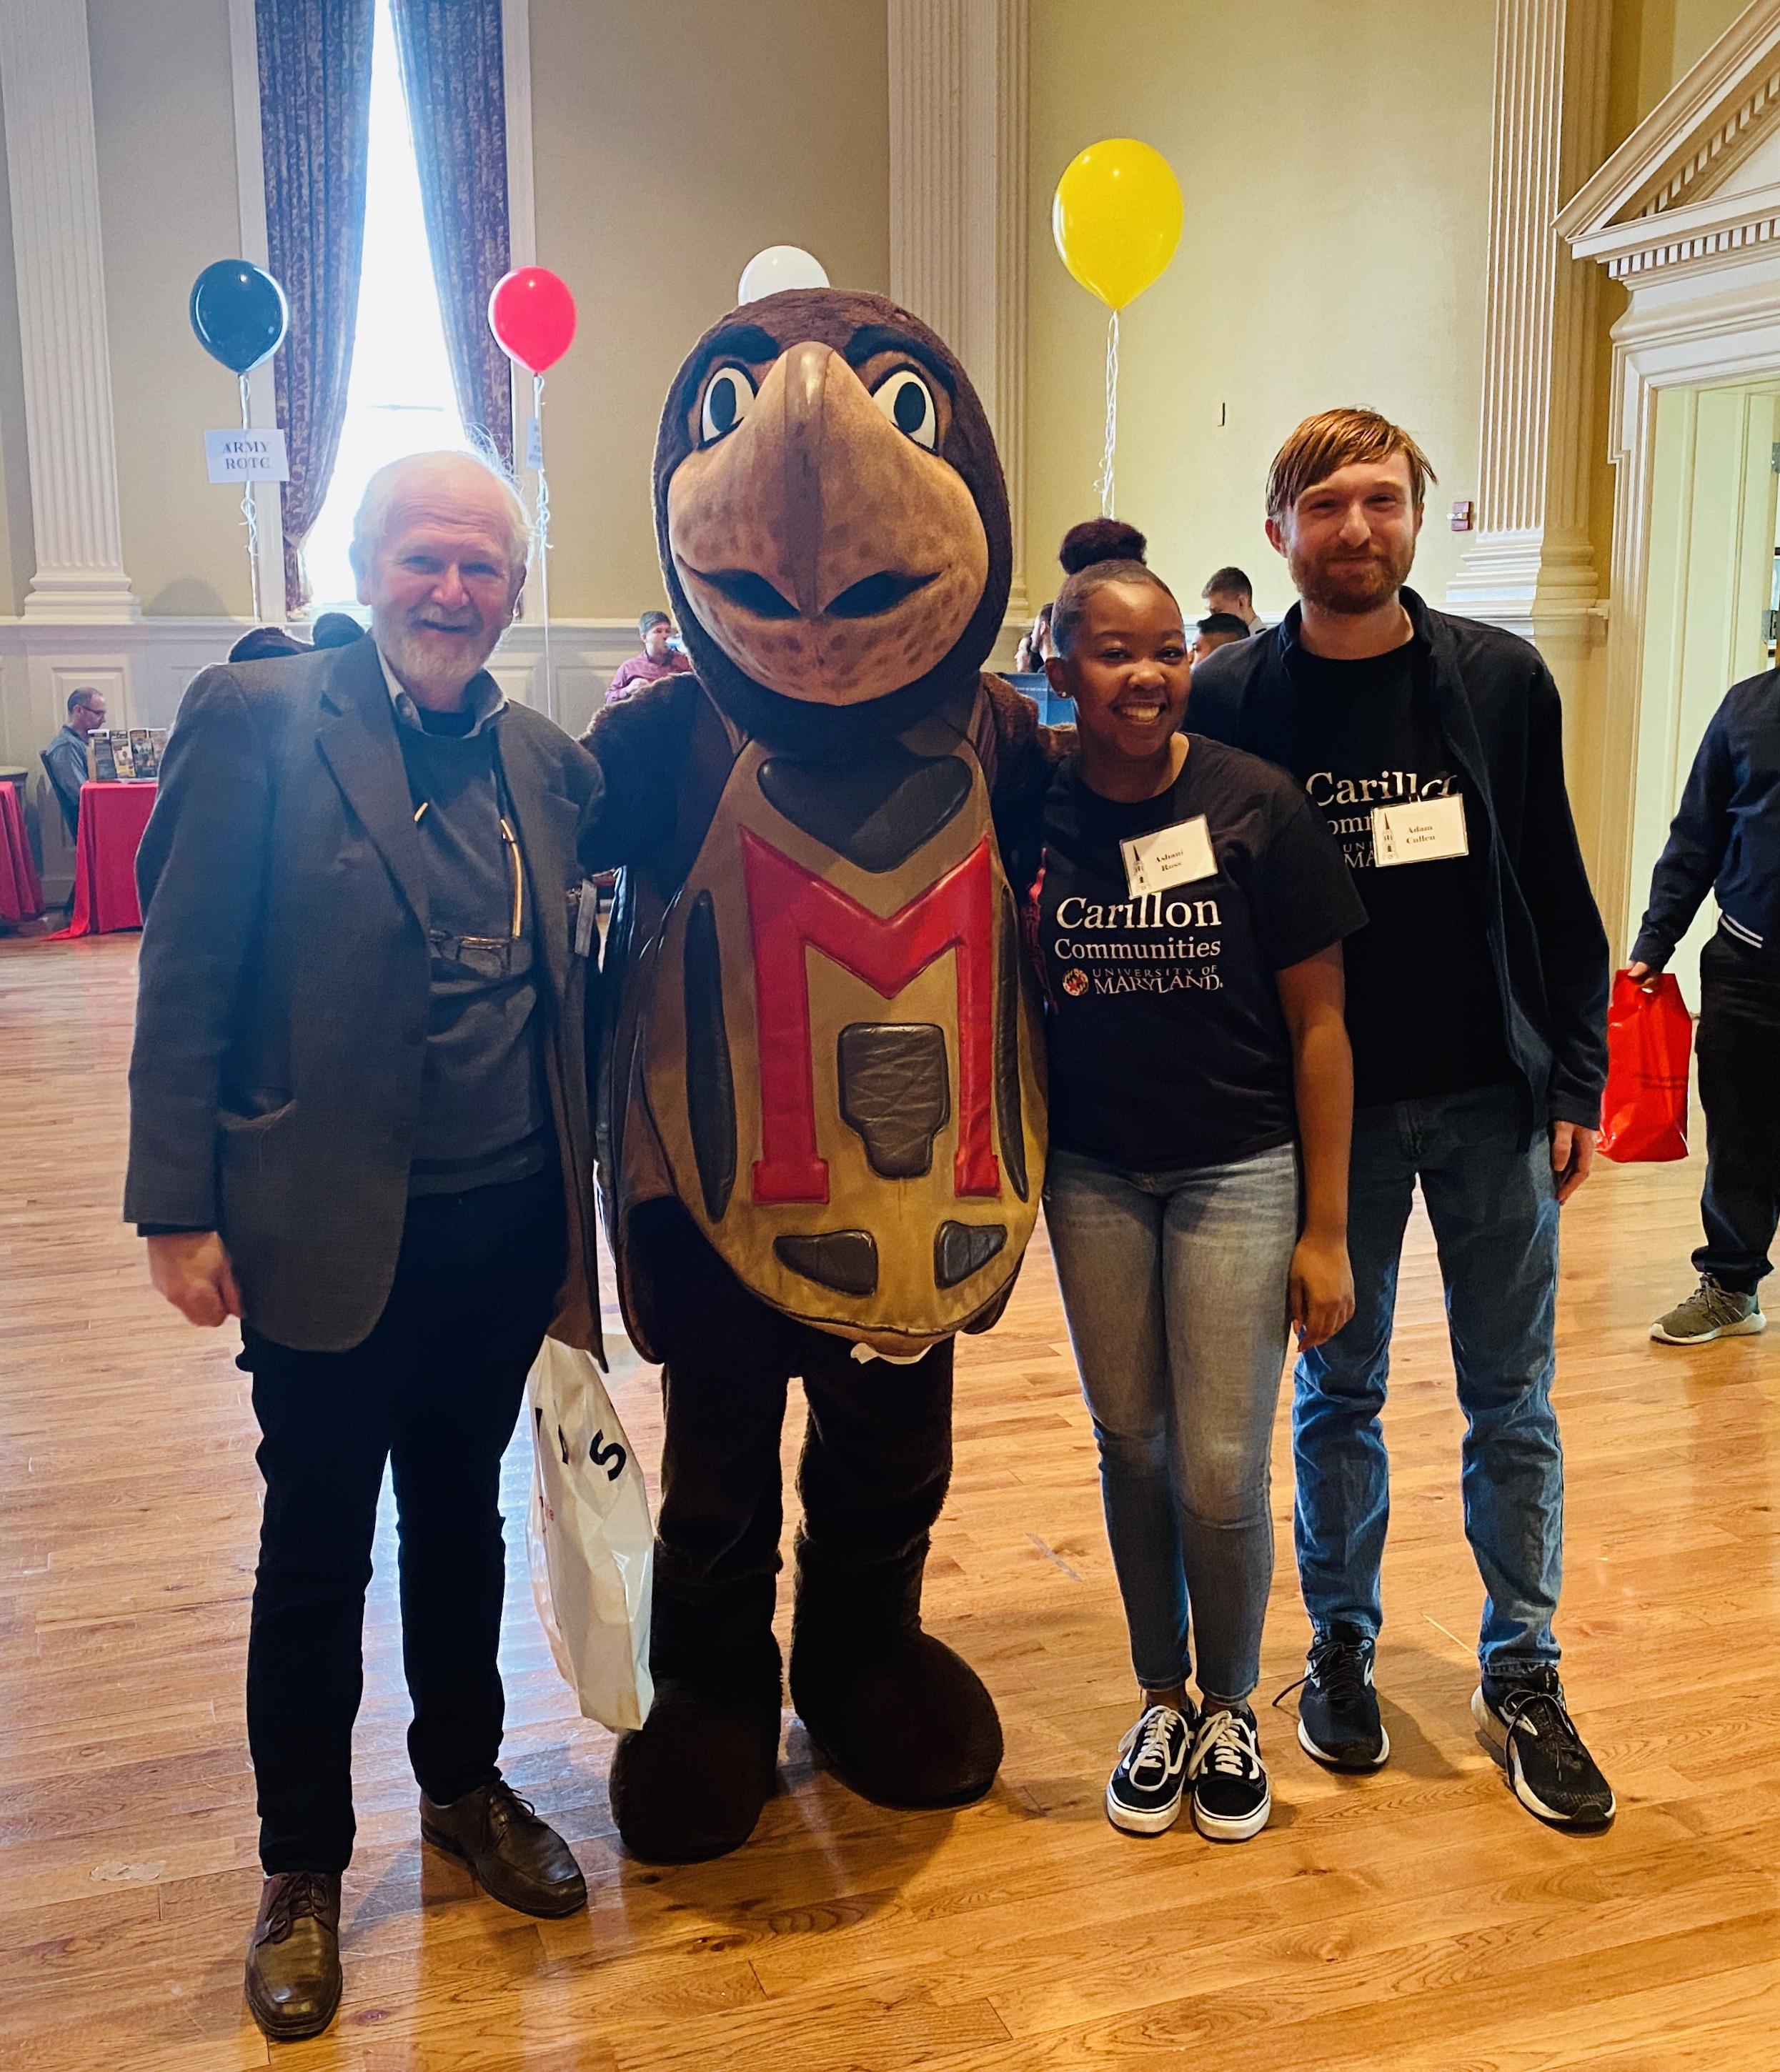 Carillon students at recruitment event with Testudo mascot